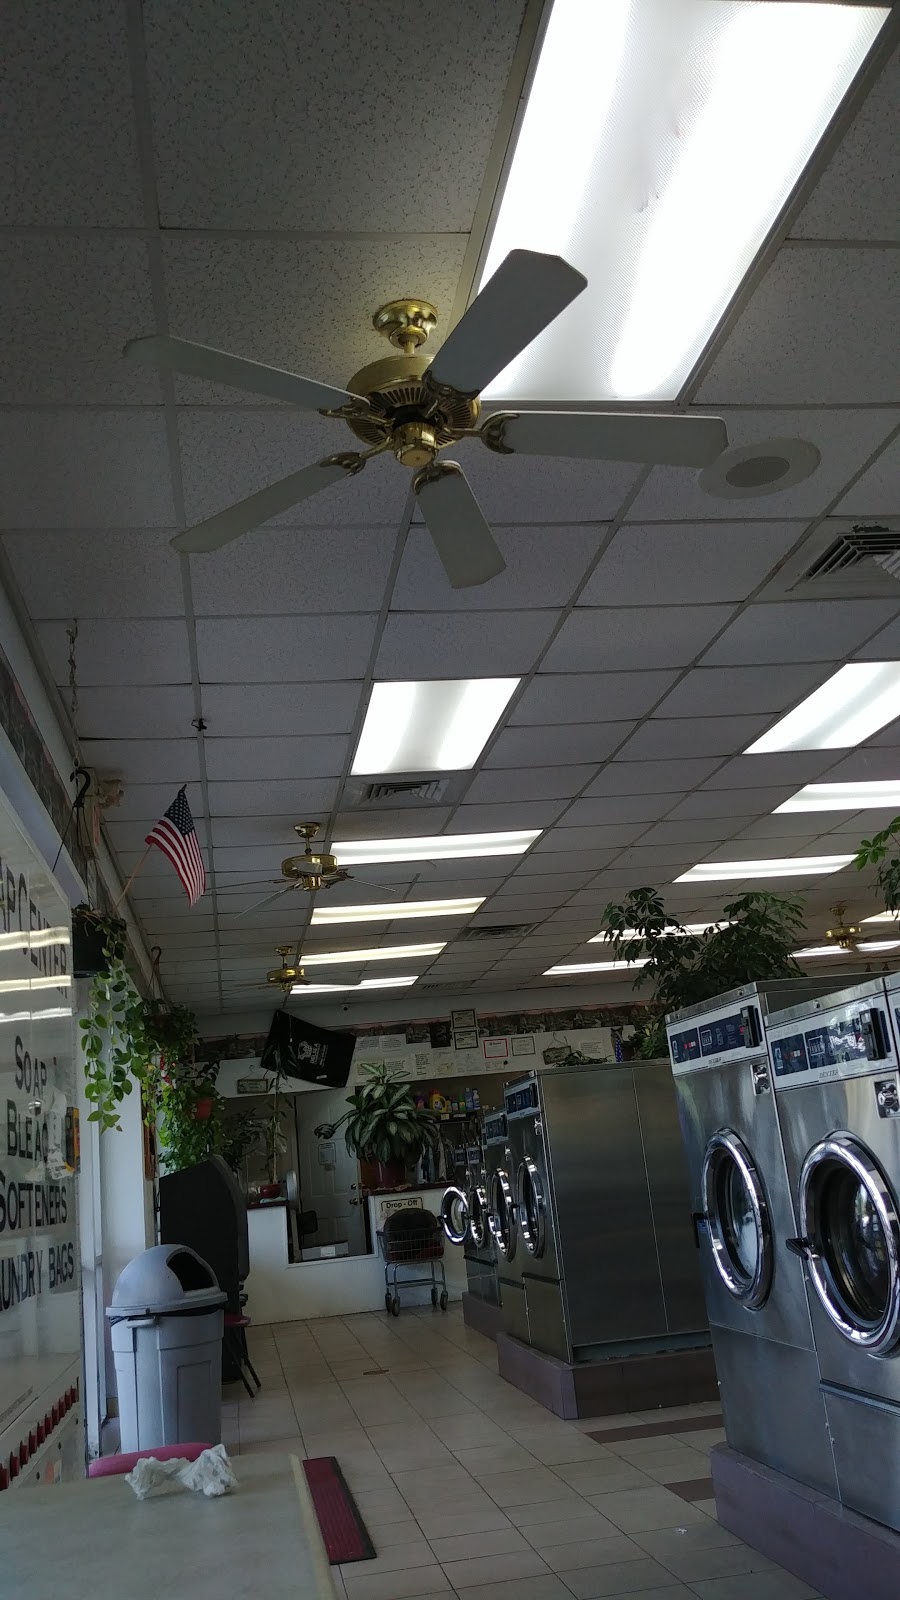 Delsea Laundromat and Dry Cleaners | 1185 S Delsea Dr #6207, Vineland, NJ 08360 | Phone: (856) 696-8287